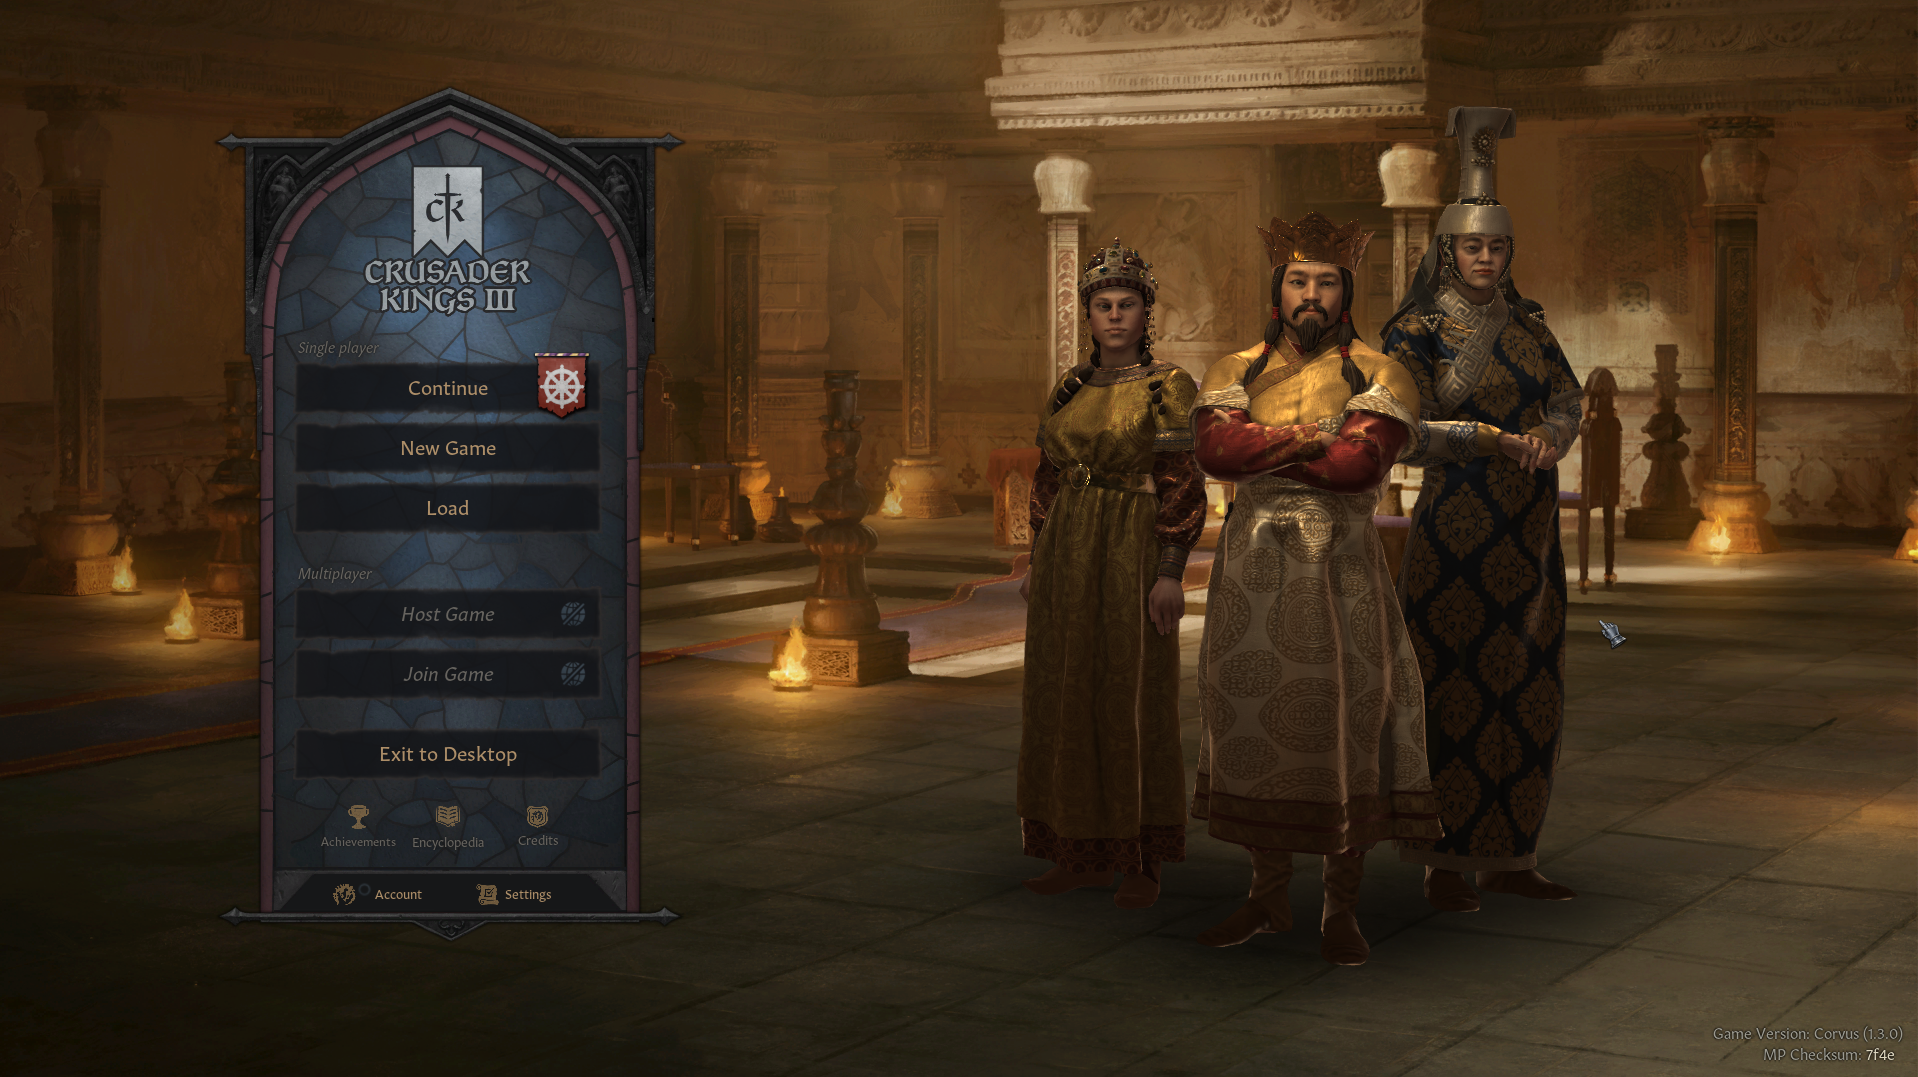 Crusader Kings 3 (CK3)'s starting screen will show the key members of the Dynasty that you are using in your latest Saved game